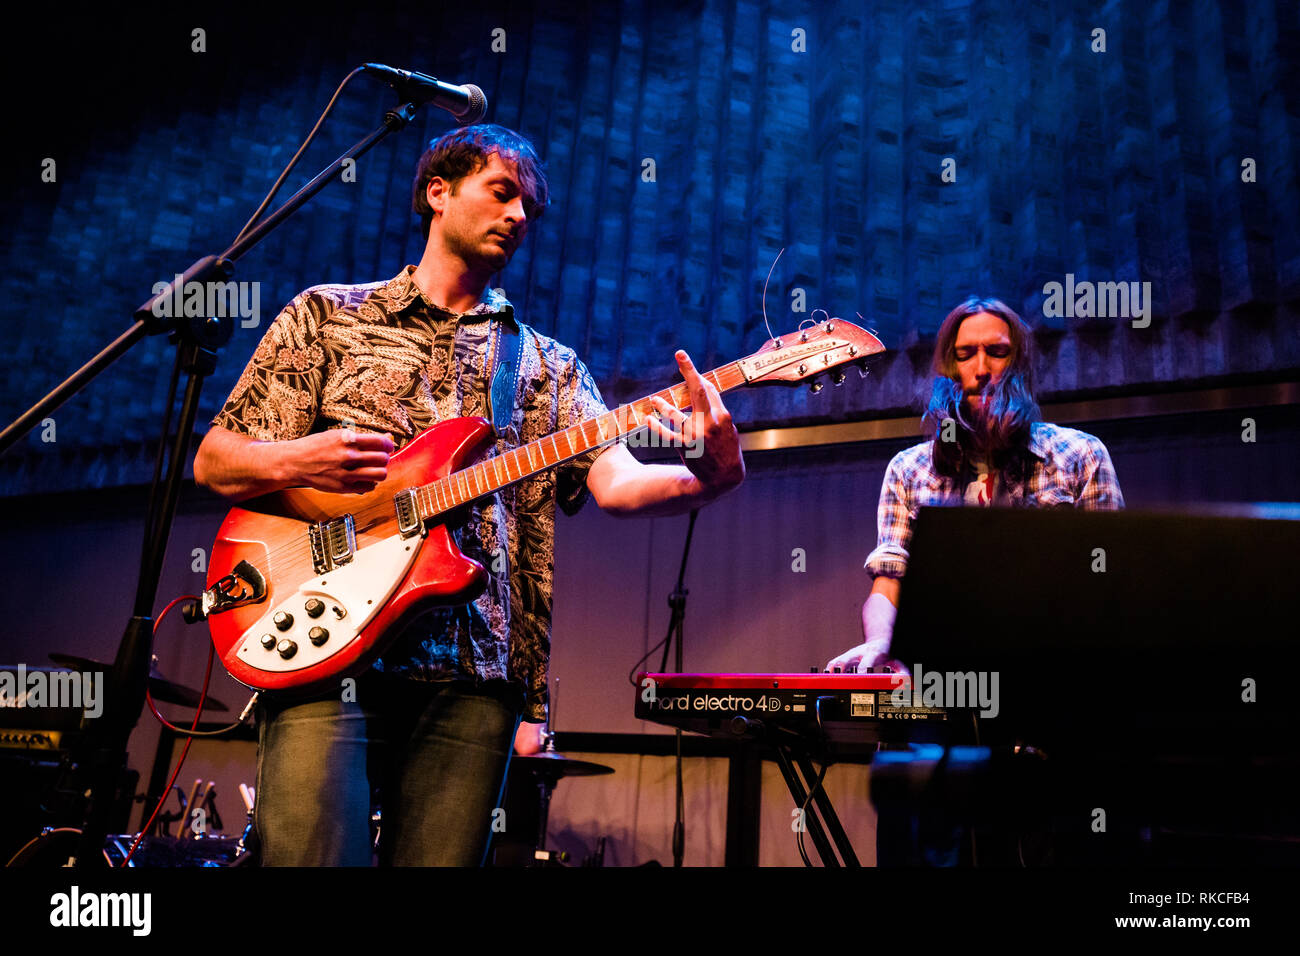 Cambridge, UK. 10th February, 2019. American indie rock band Gringo Star perfoms live at Storey’s Field Centre in Eddington supporting band ...And You Will Know Us by the Trail of Dead. Richard Etteridge / Alamy Live News Stock Photo